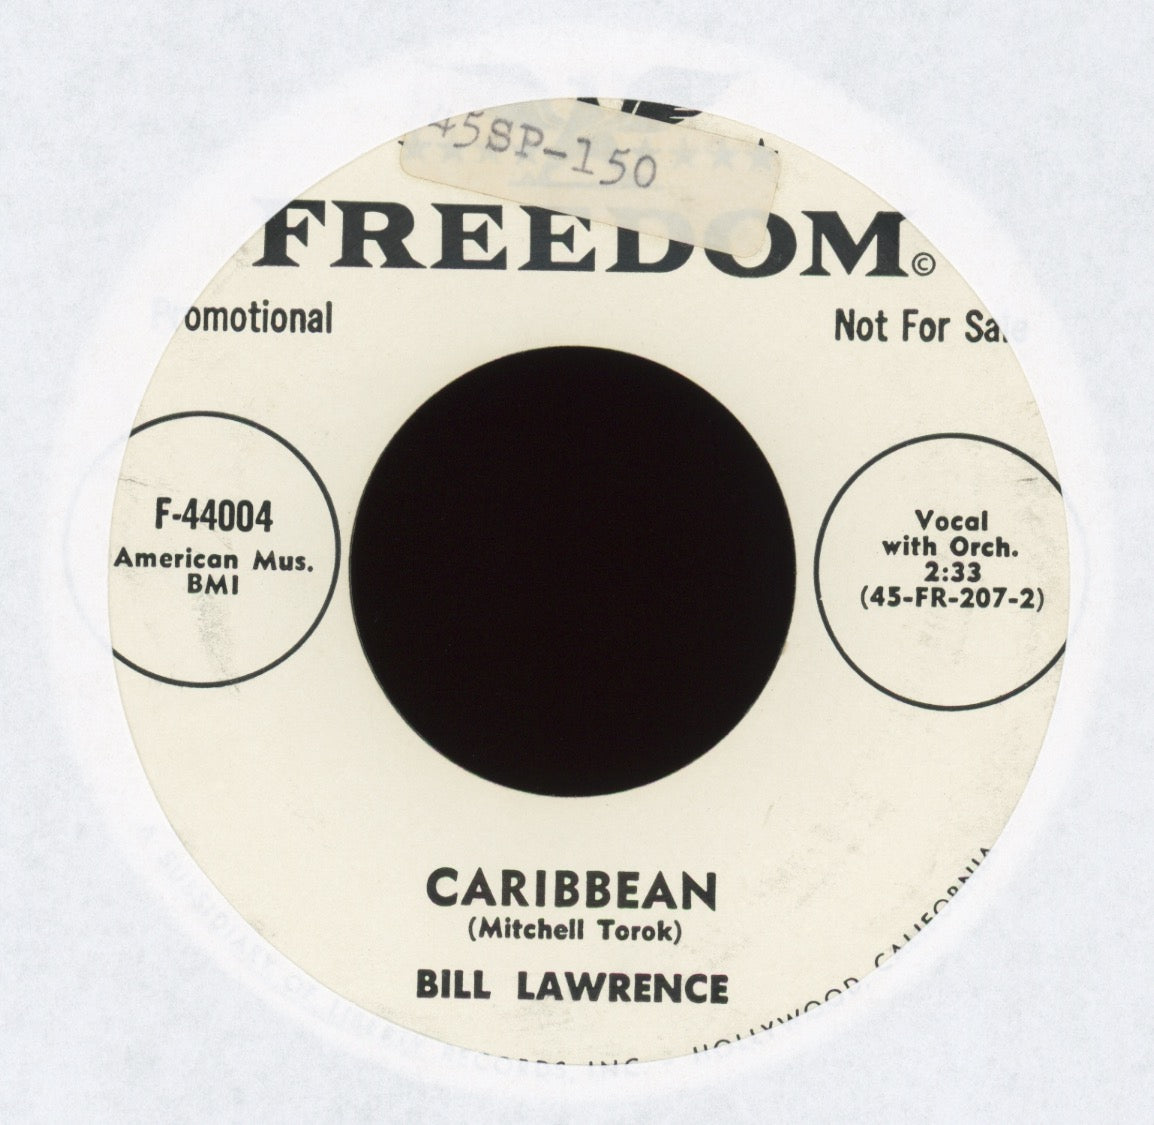 Bill Lawrence - Hey Baby! on Freedom Promo